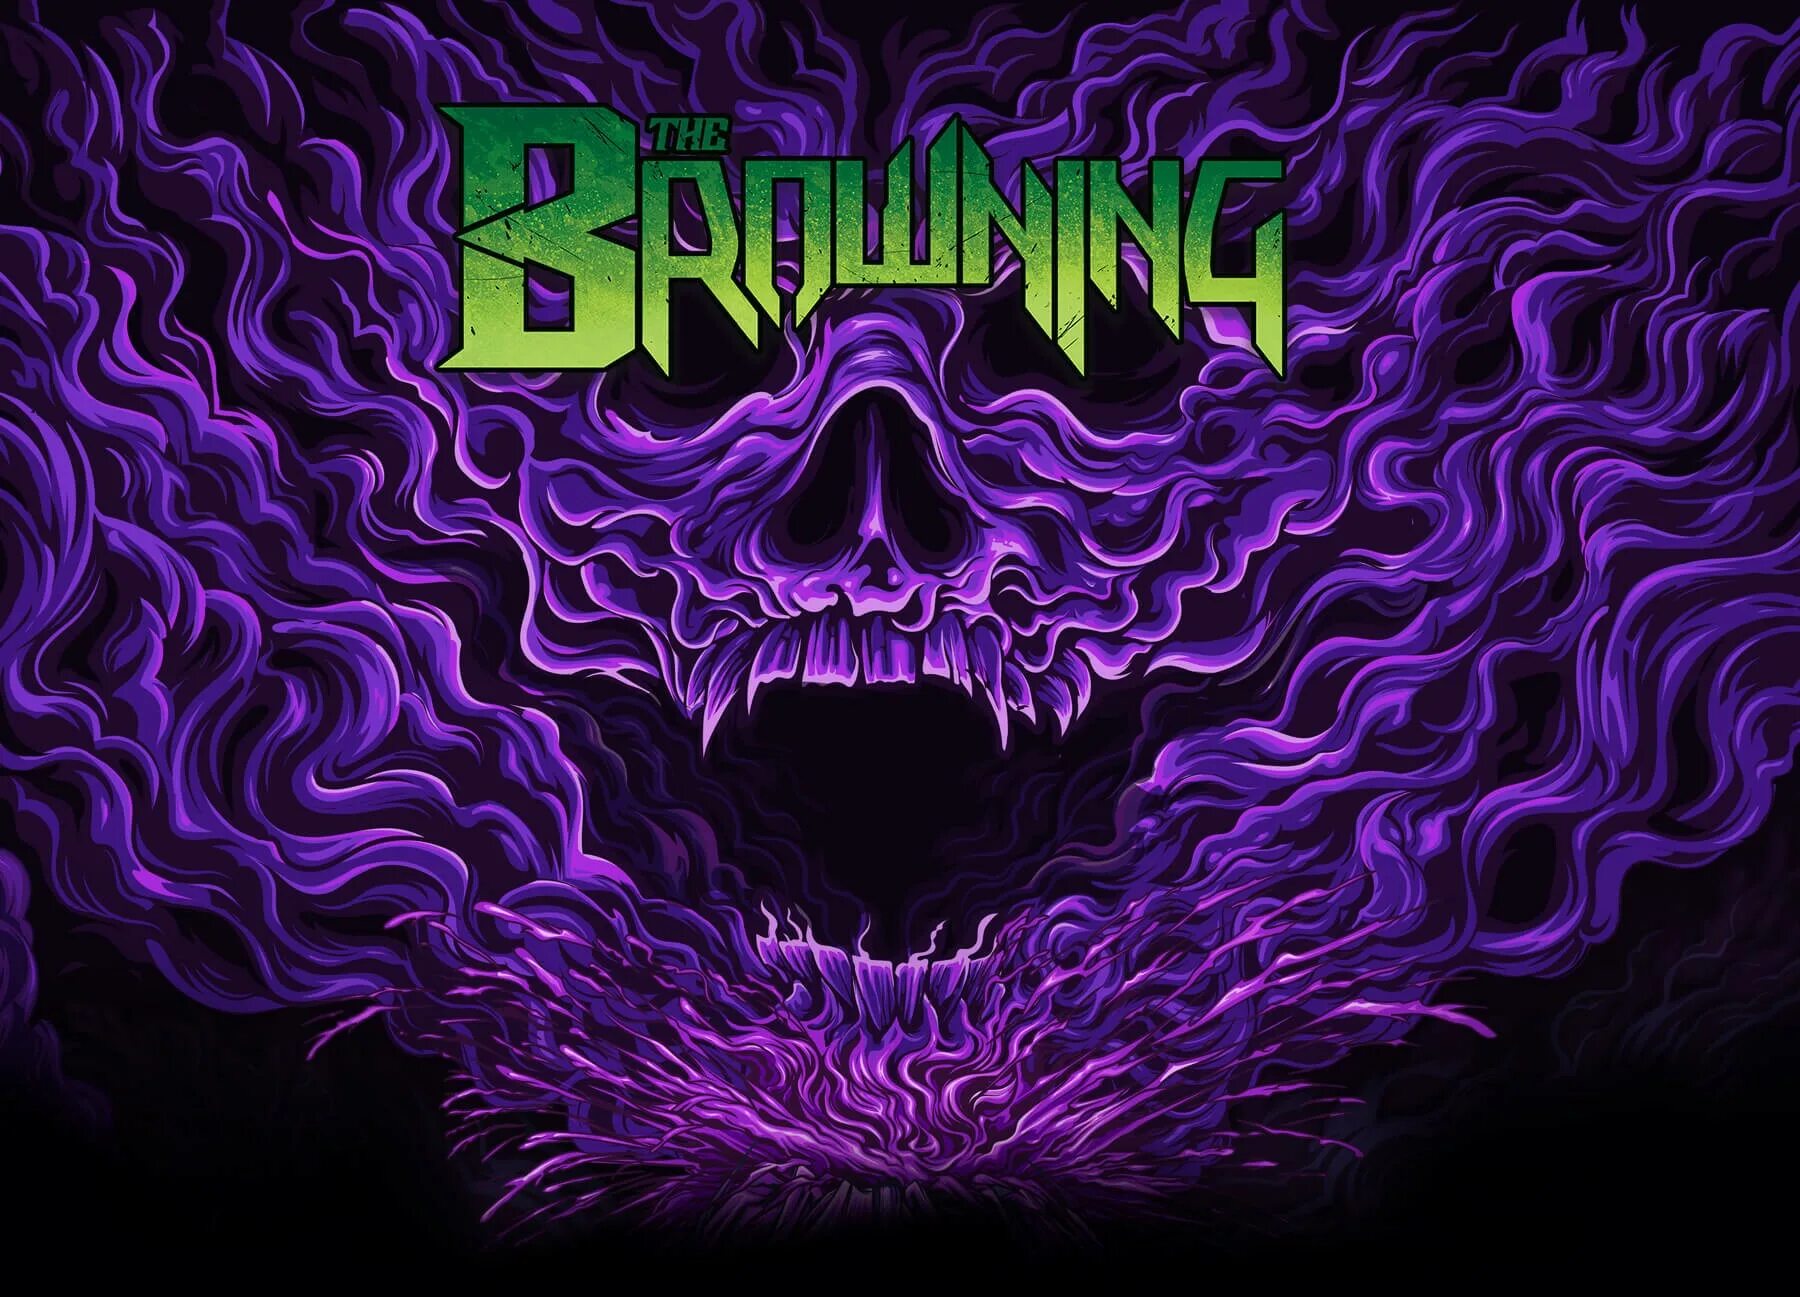 The browning time. The Browning группа. The Browning альбомы. The Browning обложки. The Browning обложки альбомов.